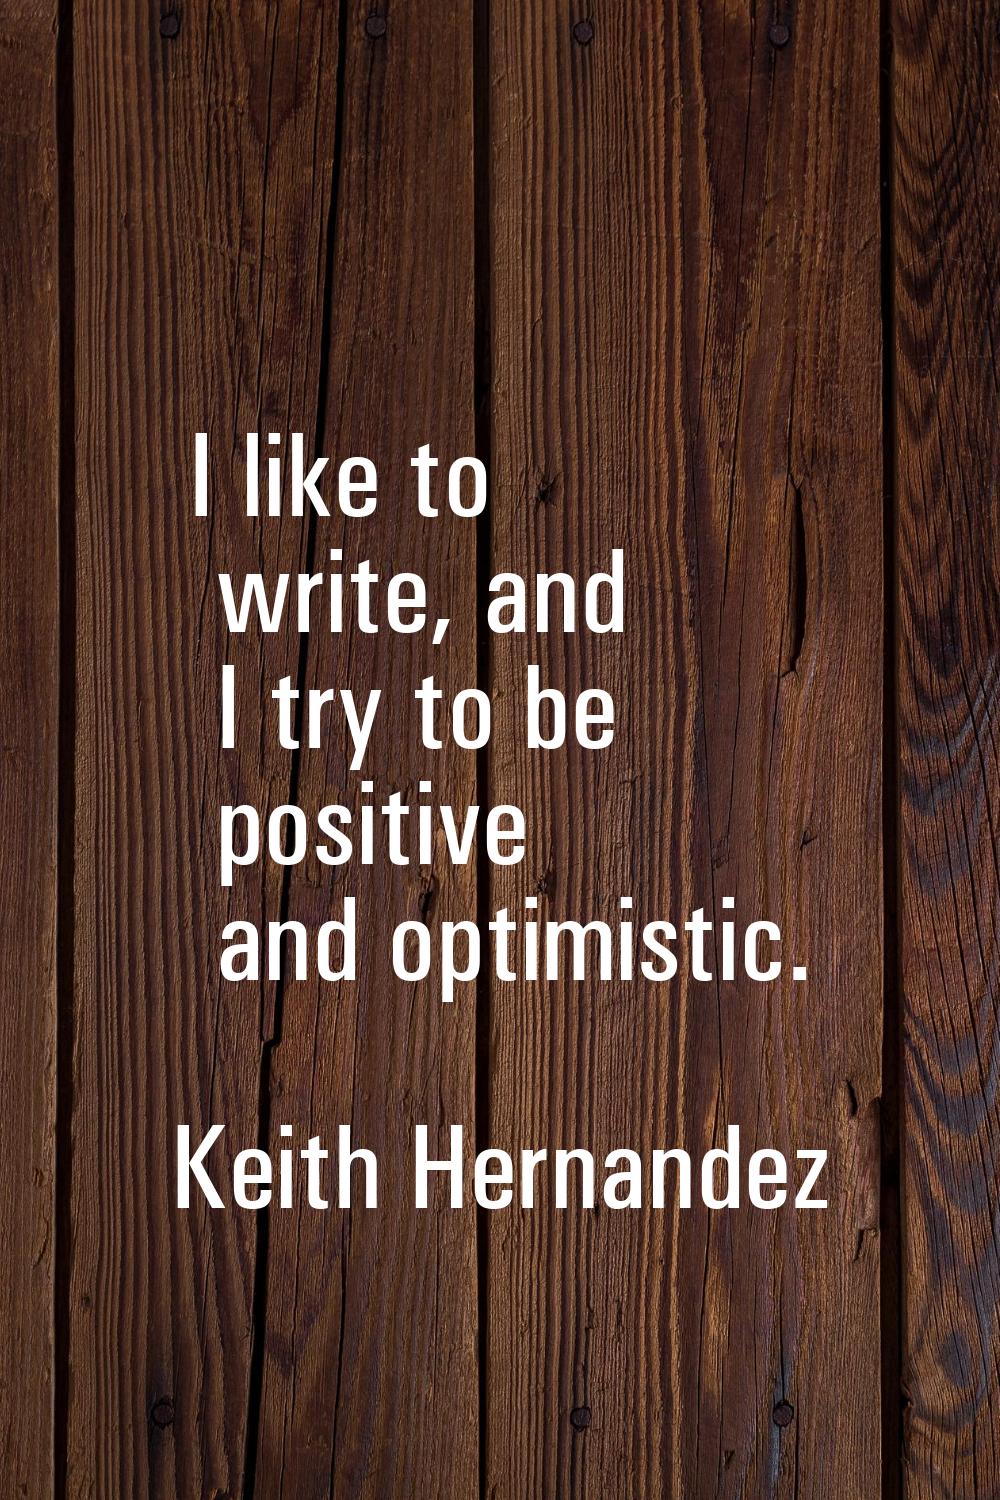 I like to write, and I try to be positive and optimistic.